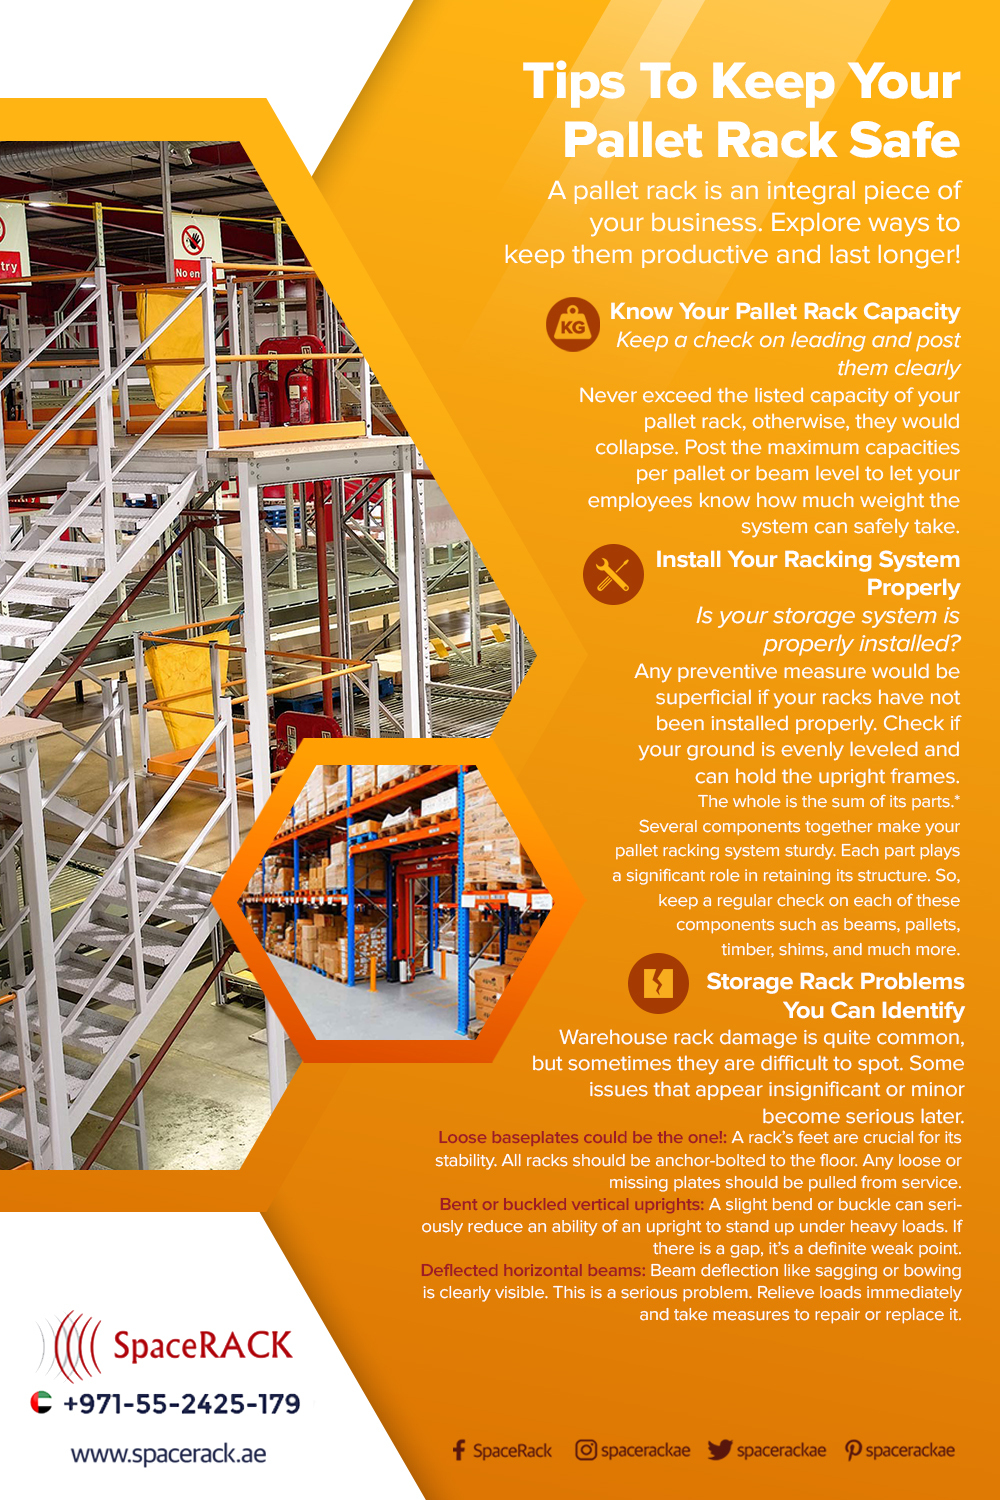 Tips To Keep Your Pallet Rack Safe